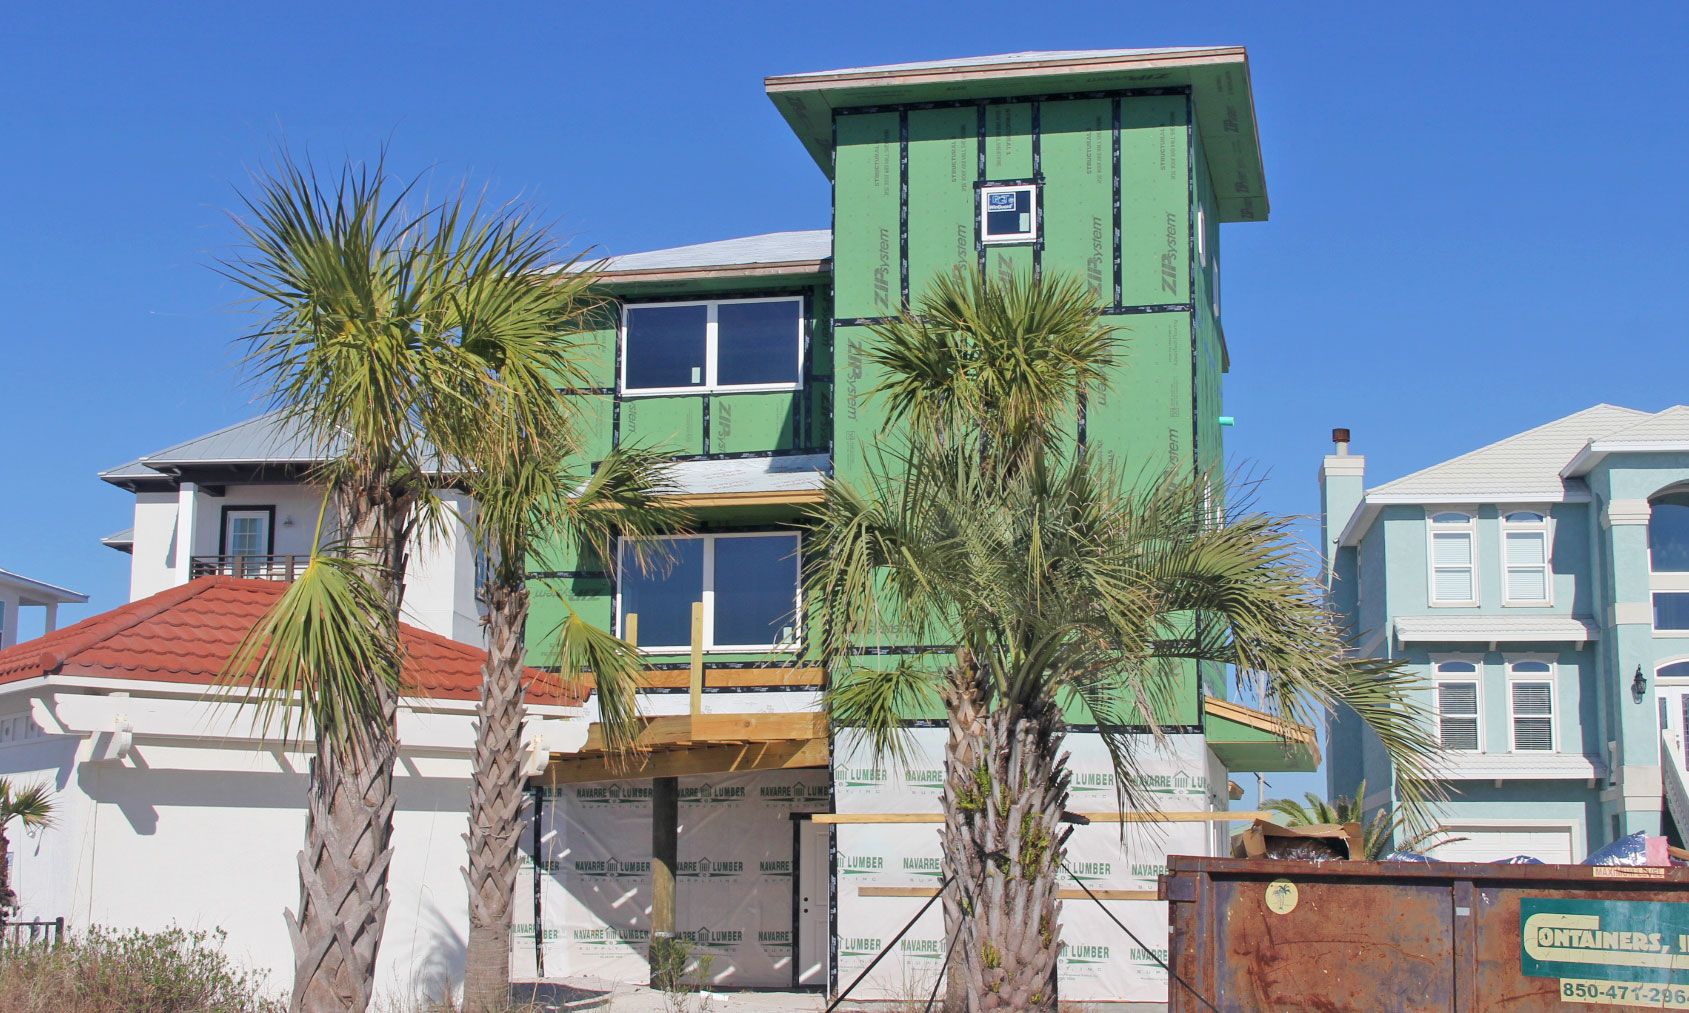 Slone piling home on Navarre Beach by Acorn Fine Homes